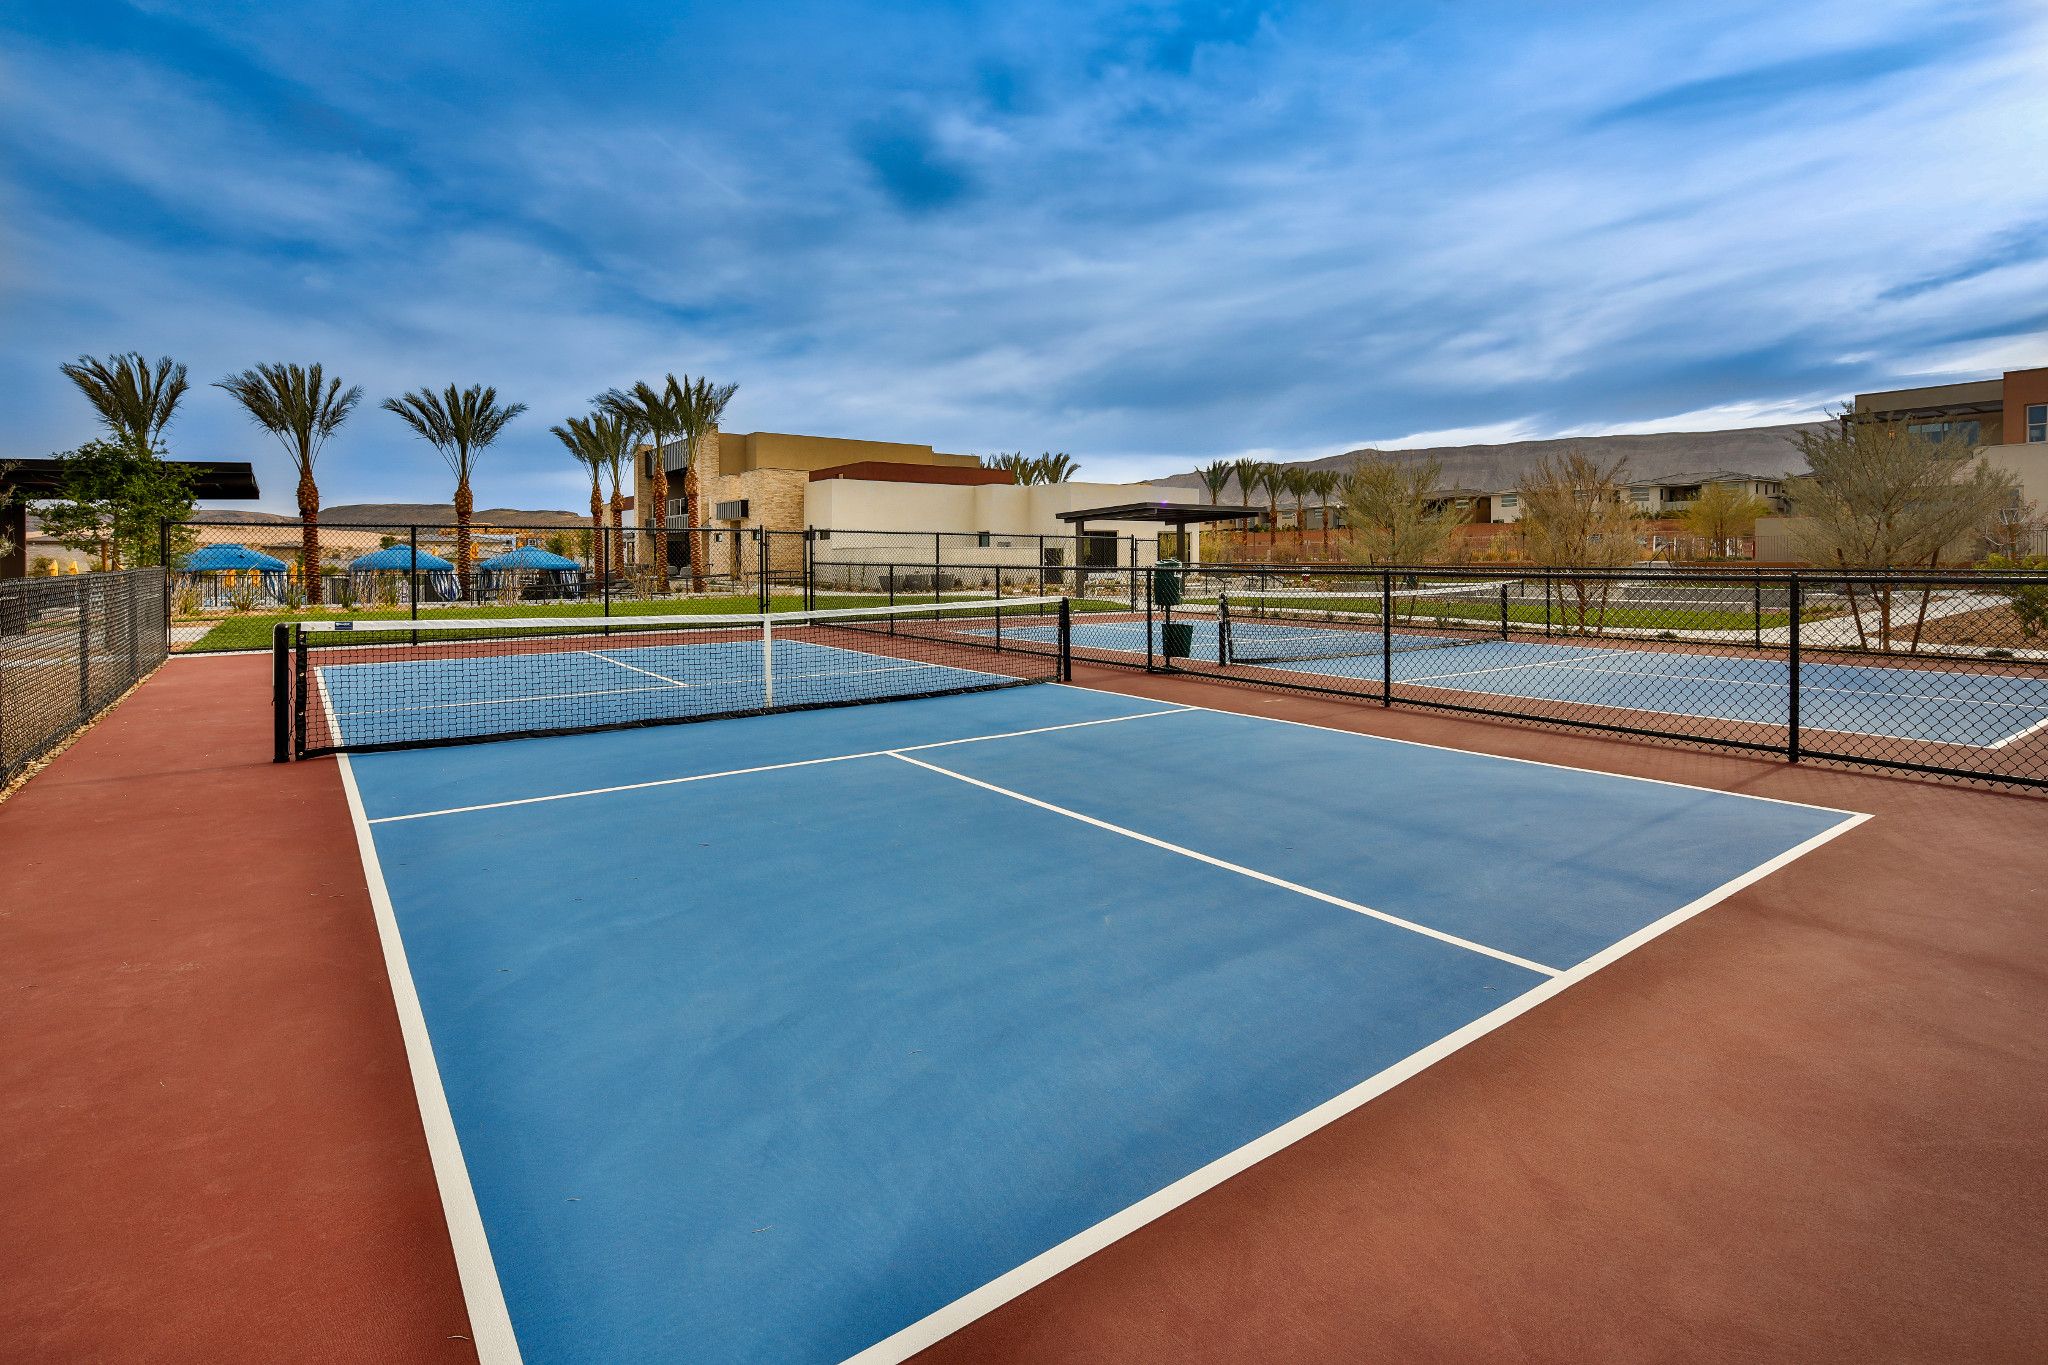 Trilogy Summerlin Pickleball Courts